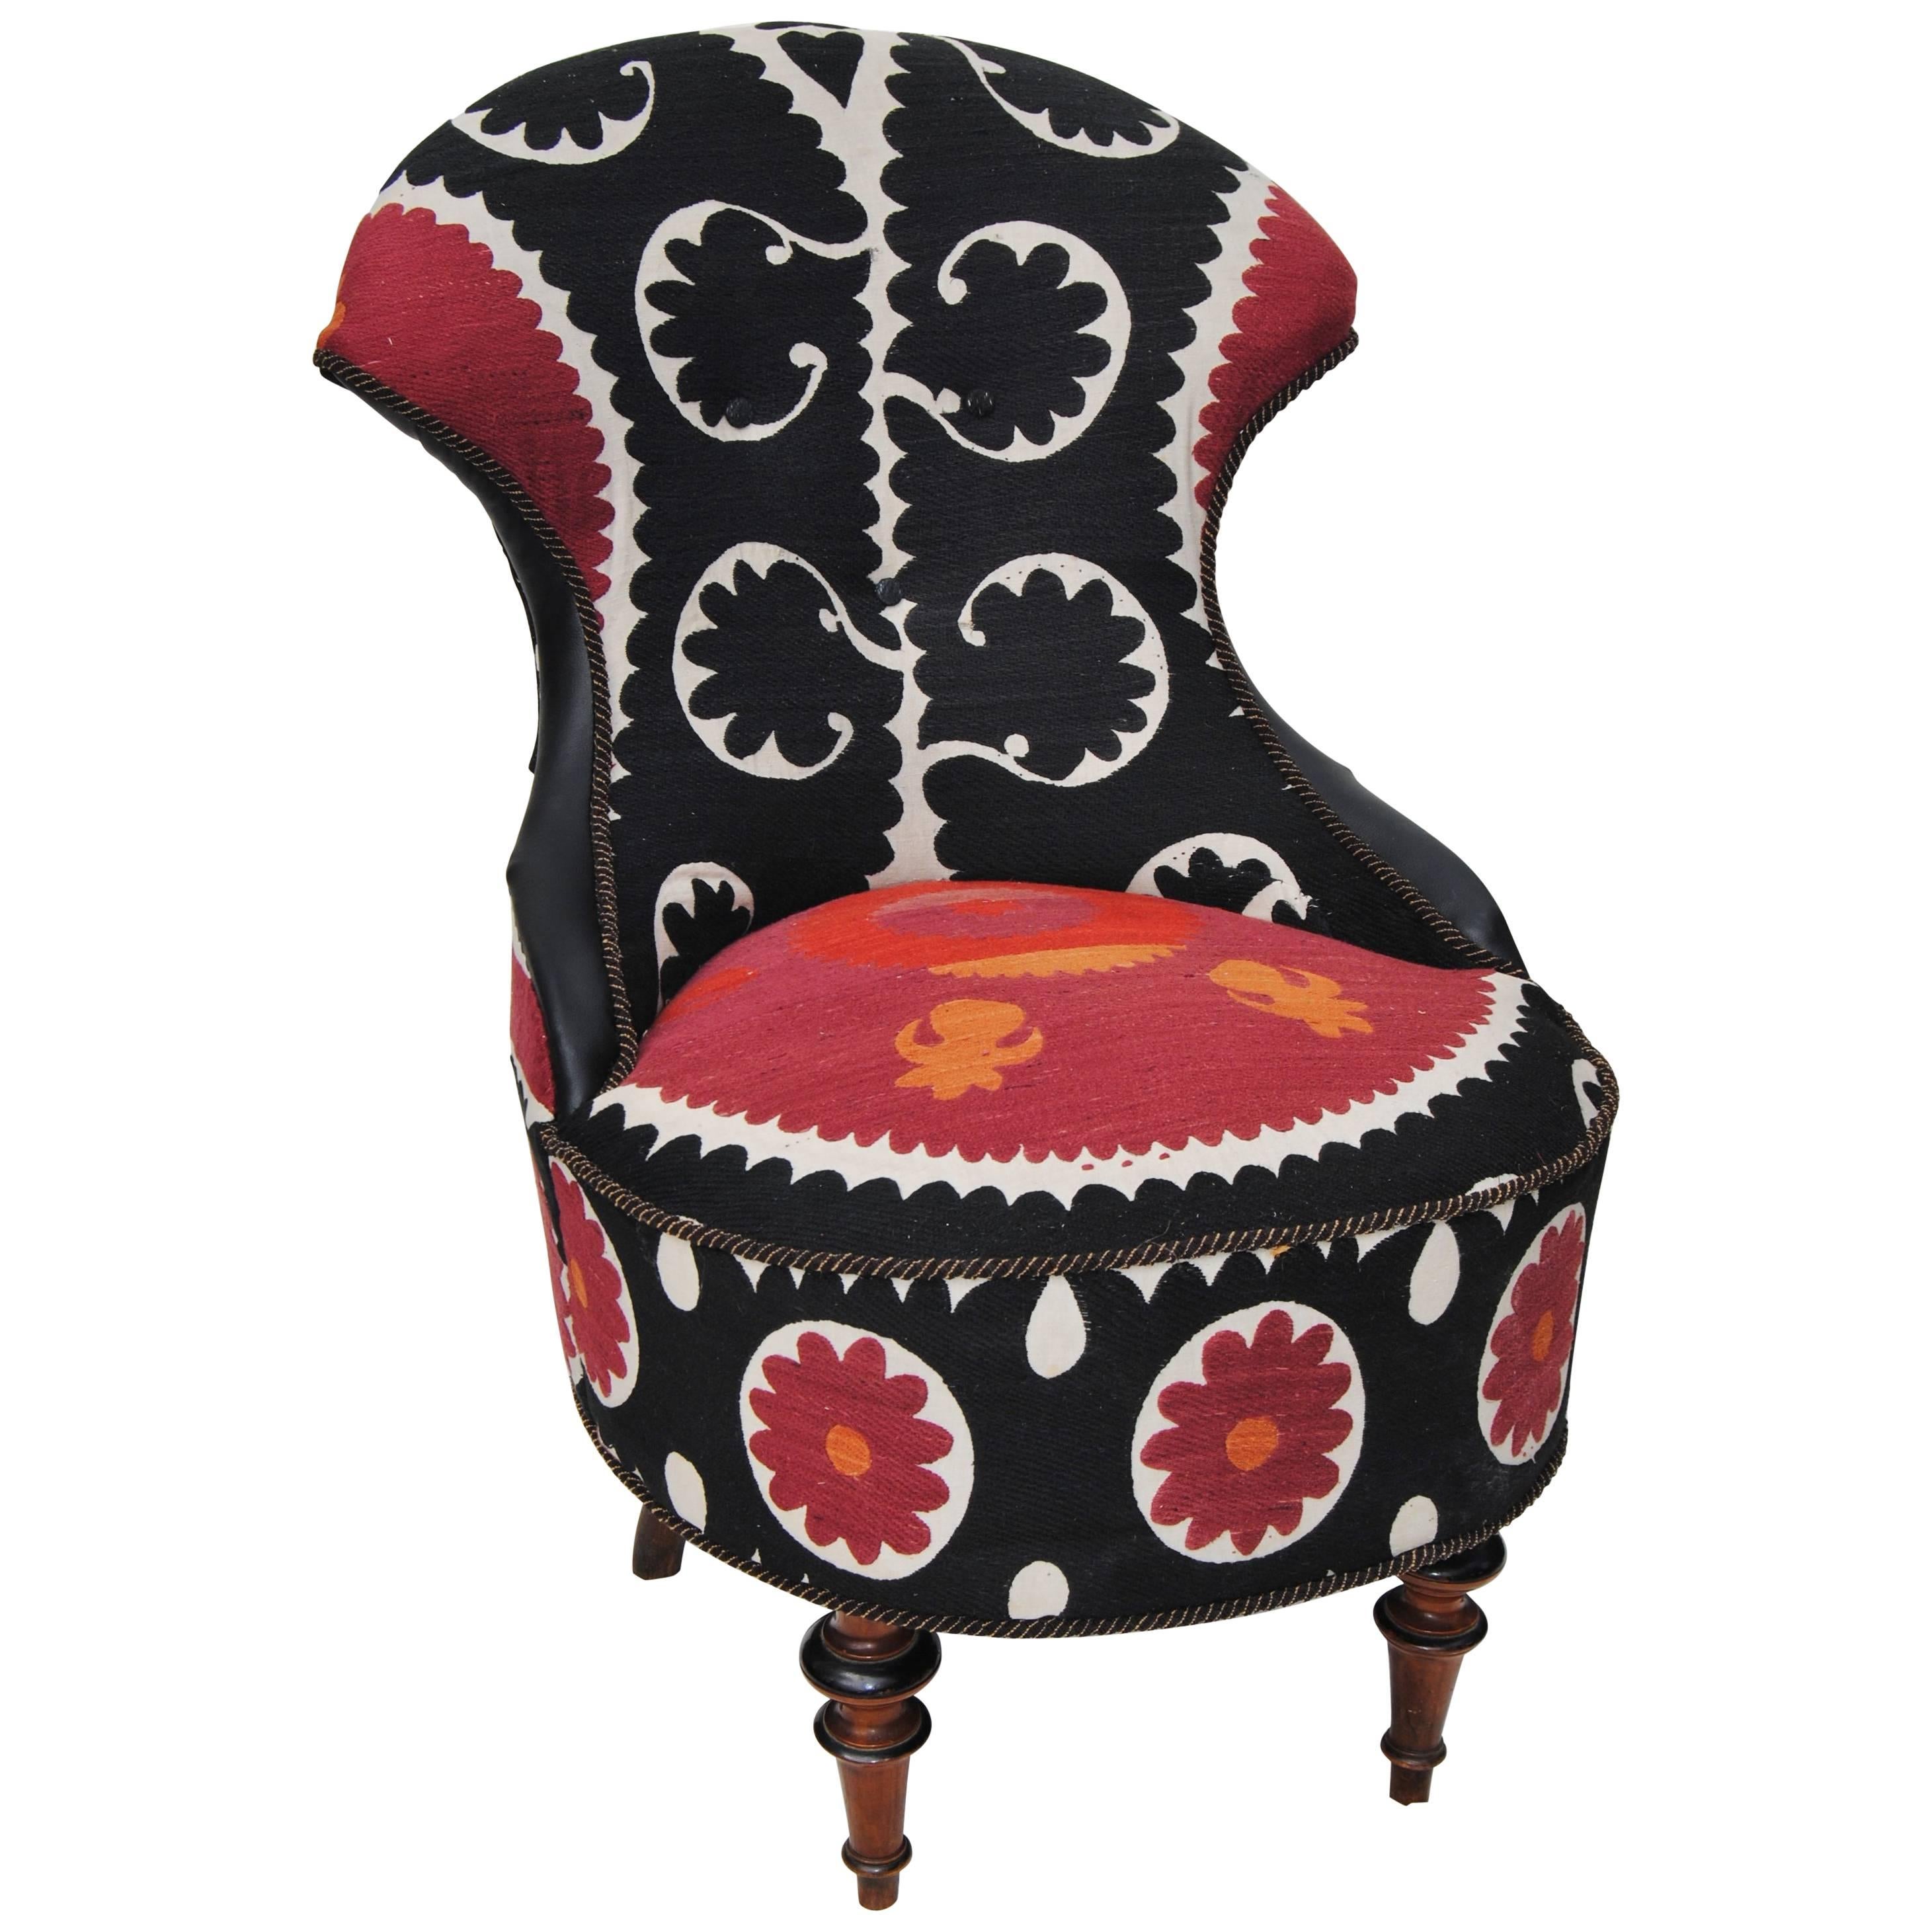 Antique European Chair Newly Upholsterd in a Vintage Suzani Textile